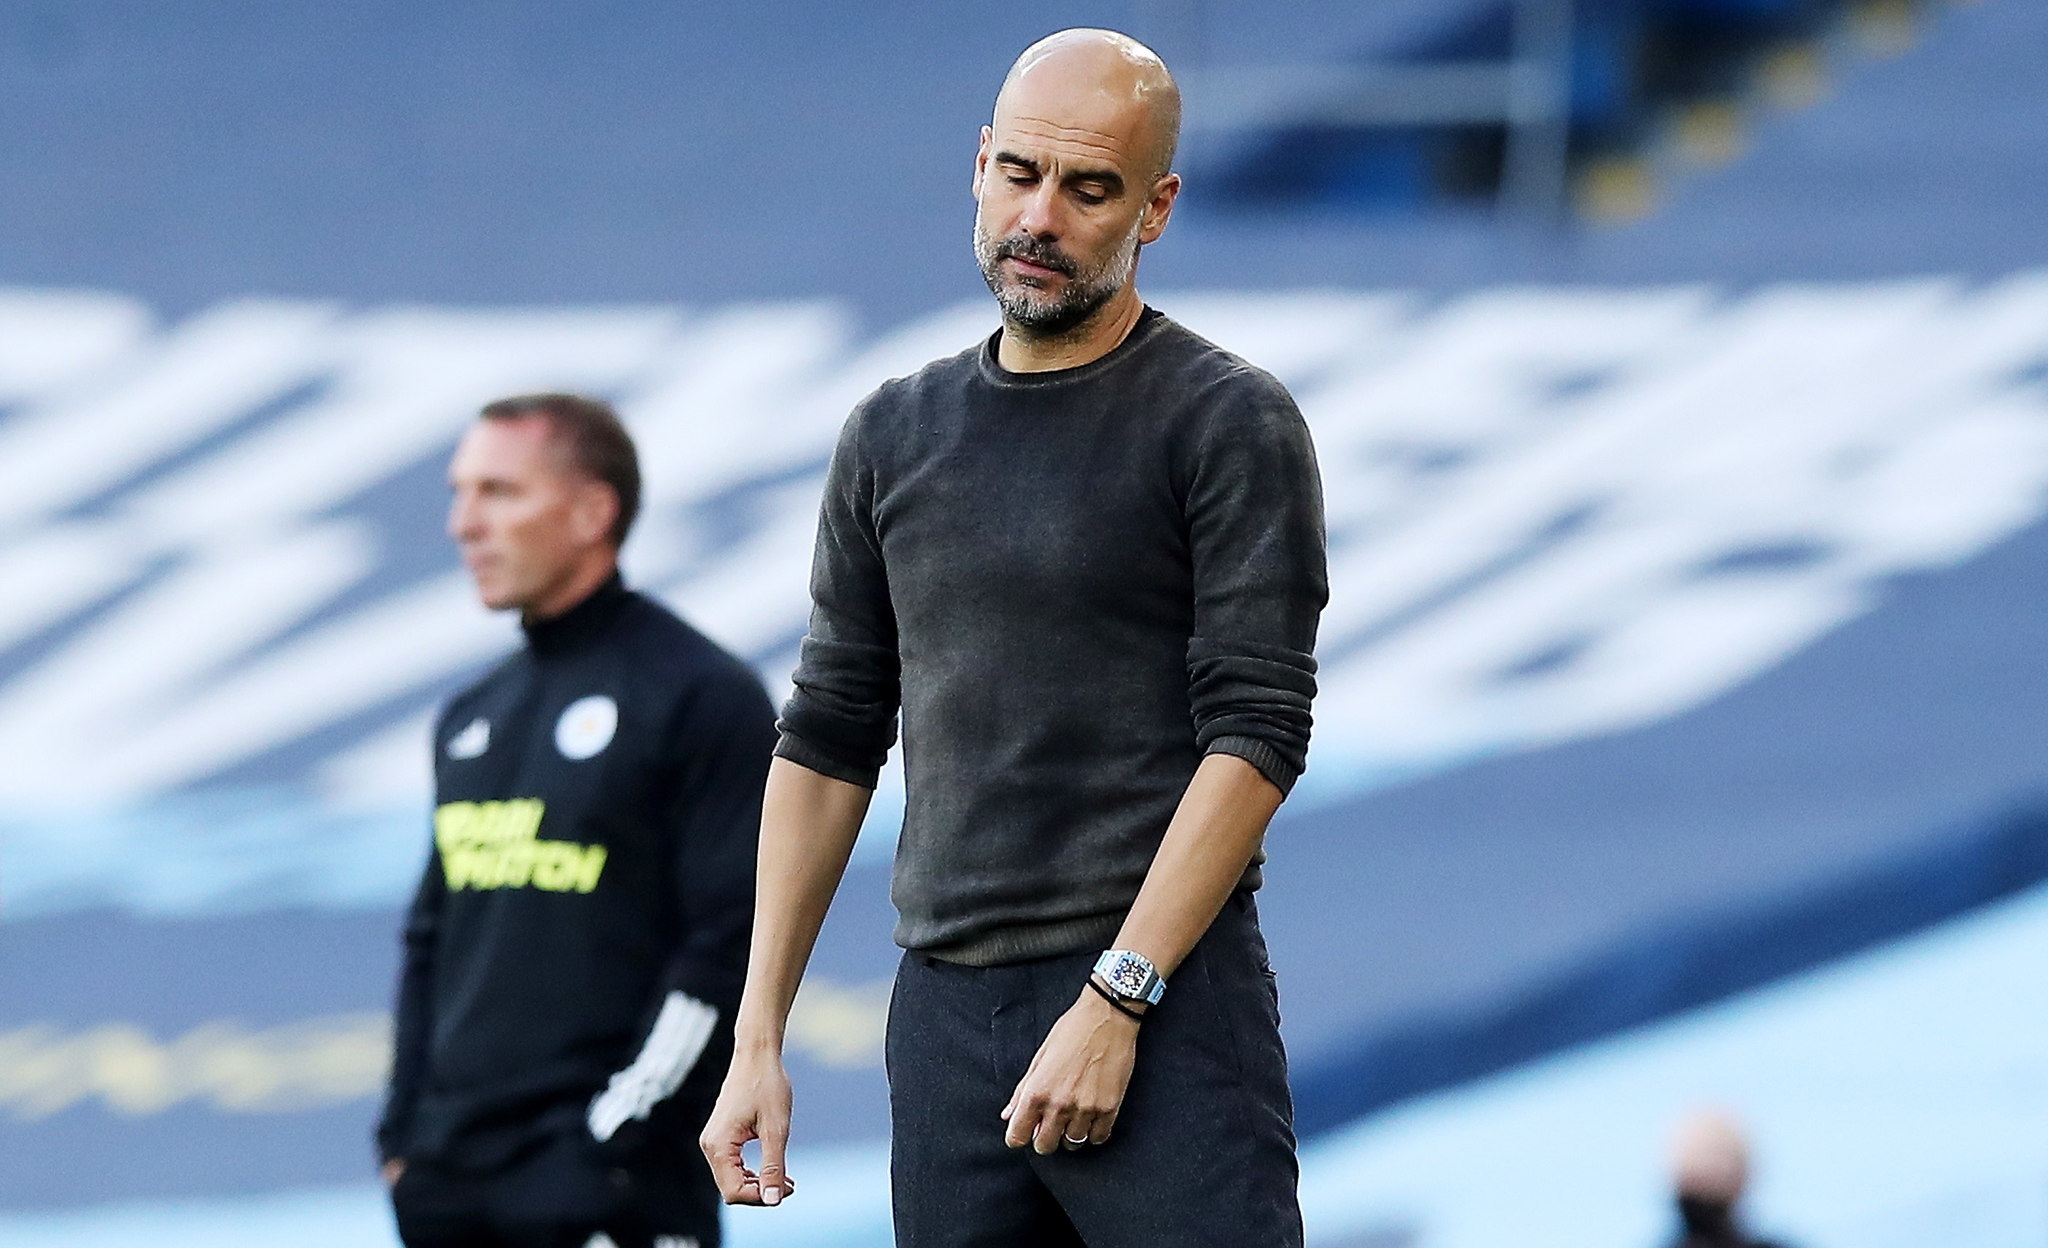 Manchester (United Kingdom), 27/09/2020.- Manchester City manager Pep lt;HIT gt;Guardiola lt;/HIT gt; during the English Premier League match between Manchester City and Leicester City in Manchester, Britain, 27 September 2020. (Reino Unido) EFE/EPA/Martin Rickett / POOL EDITORIAL USE ONLY. No use with unauthorized audio, video, data, fixture lists, club/league logos or 'live' services. Online in-match use limited to 120 images, no video emulation. No use in betting, games or single club/league/player publications